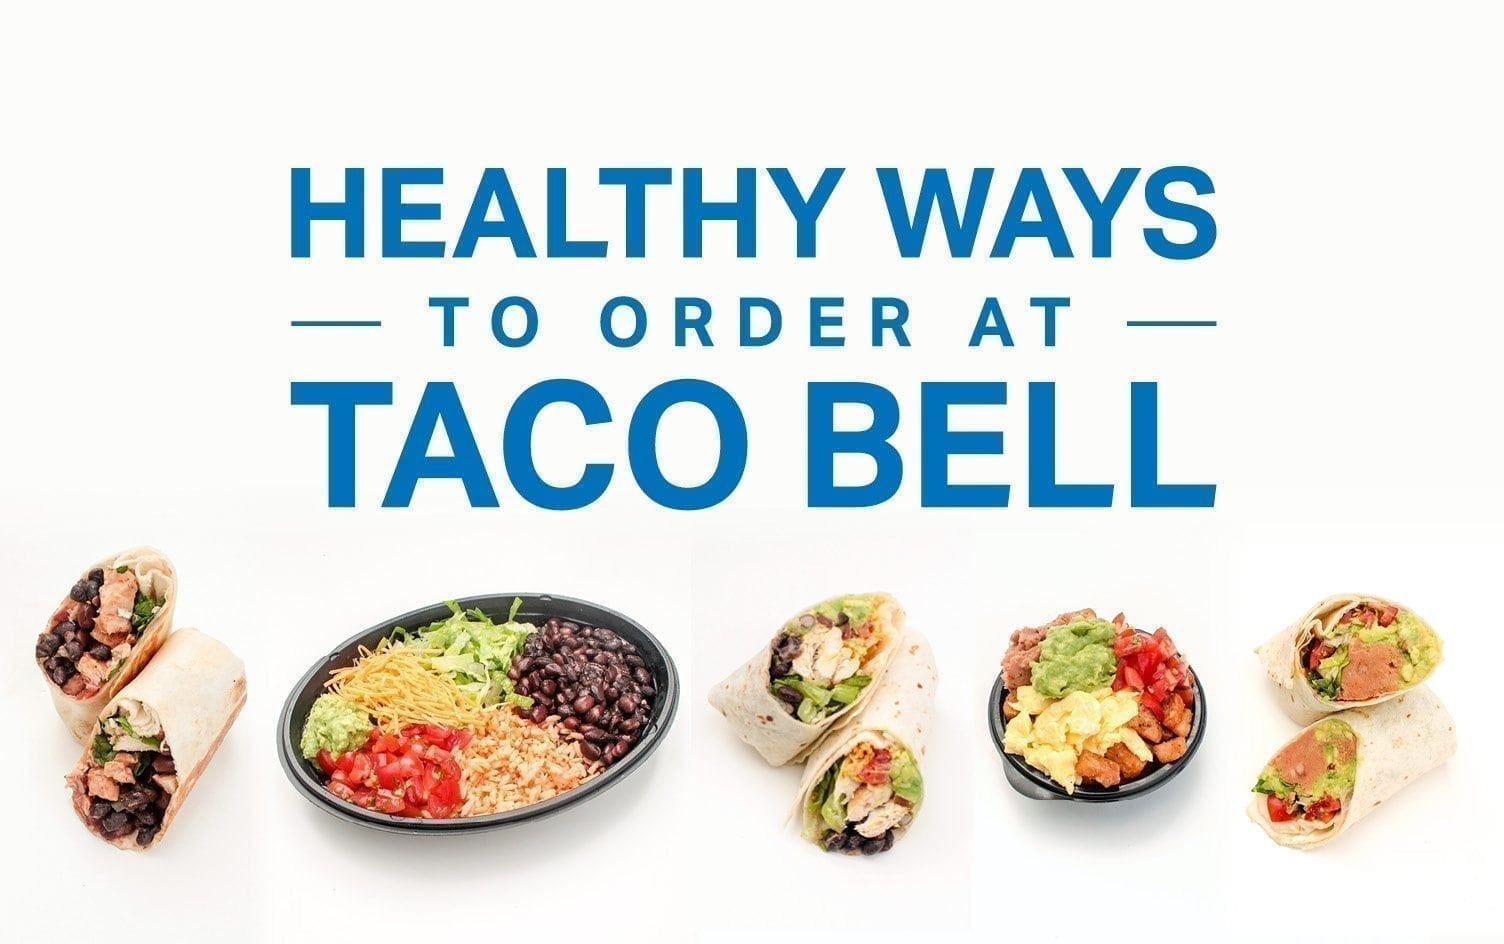 taco bell facts - Healthy Ways To Order At Taco Bell